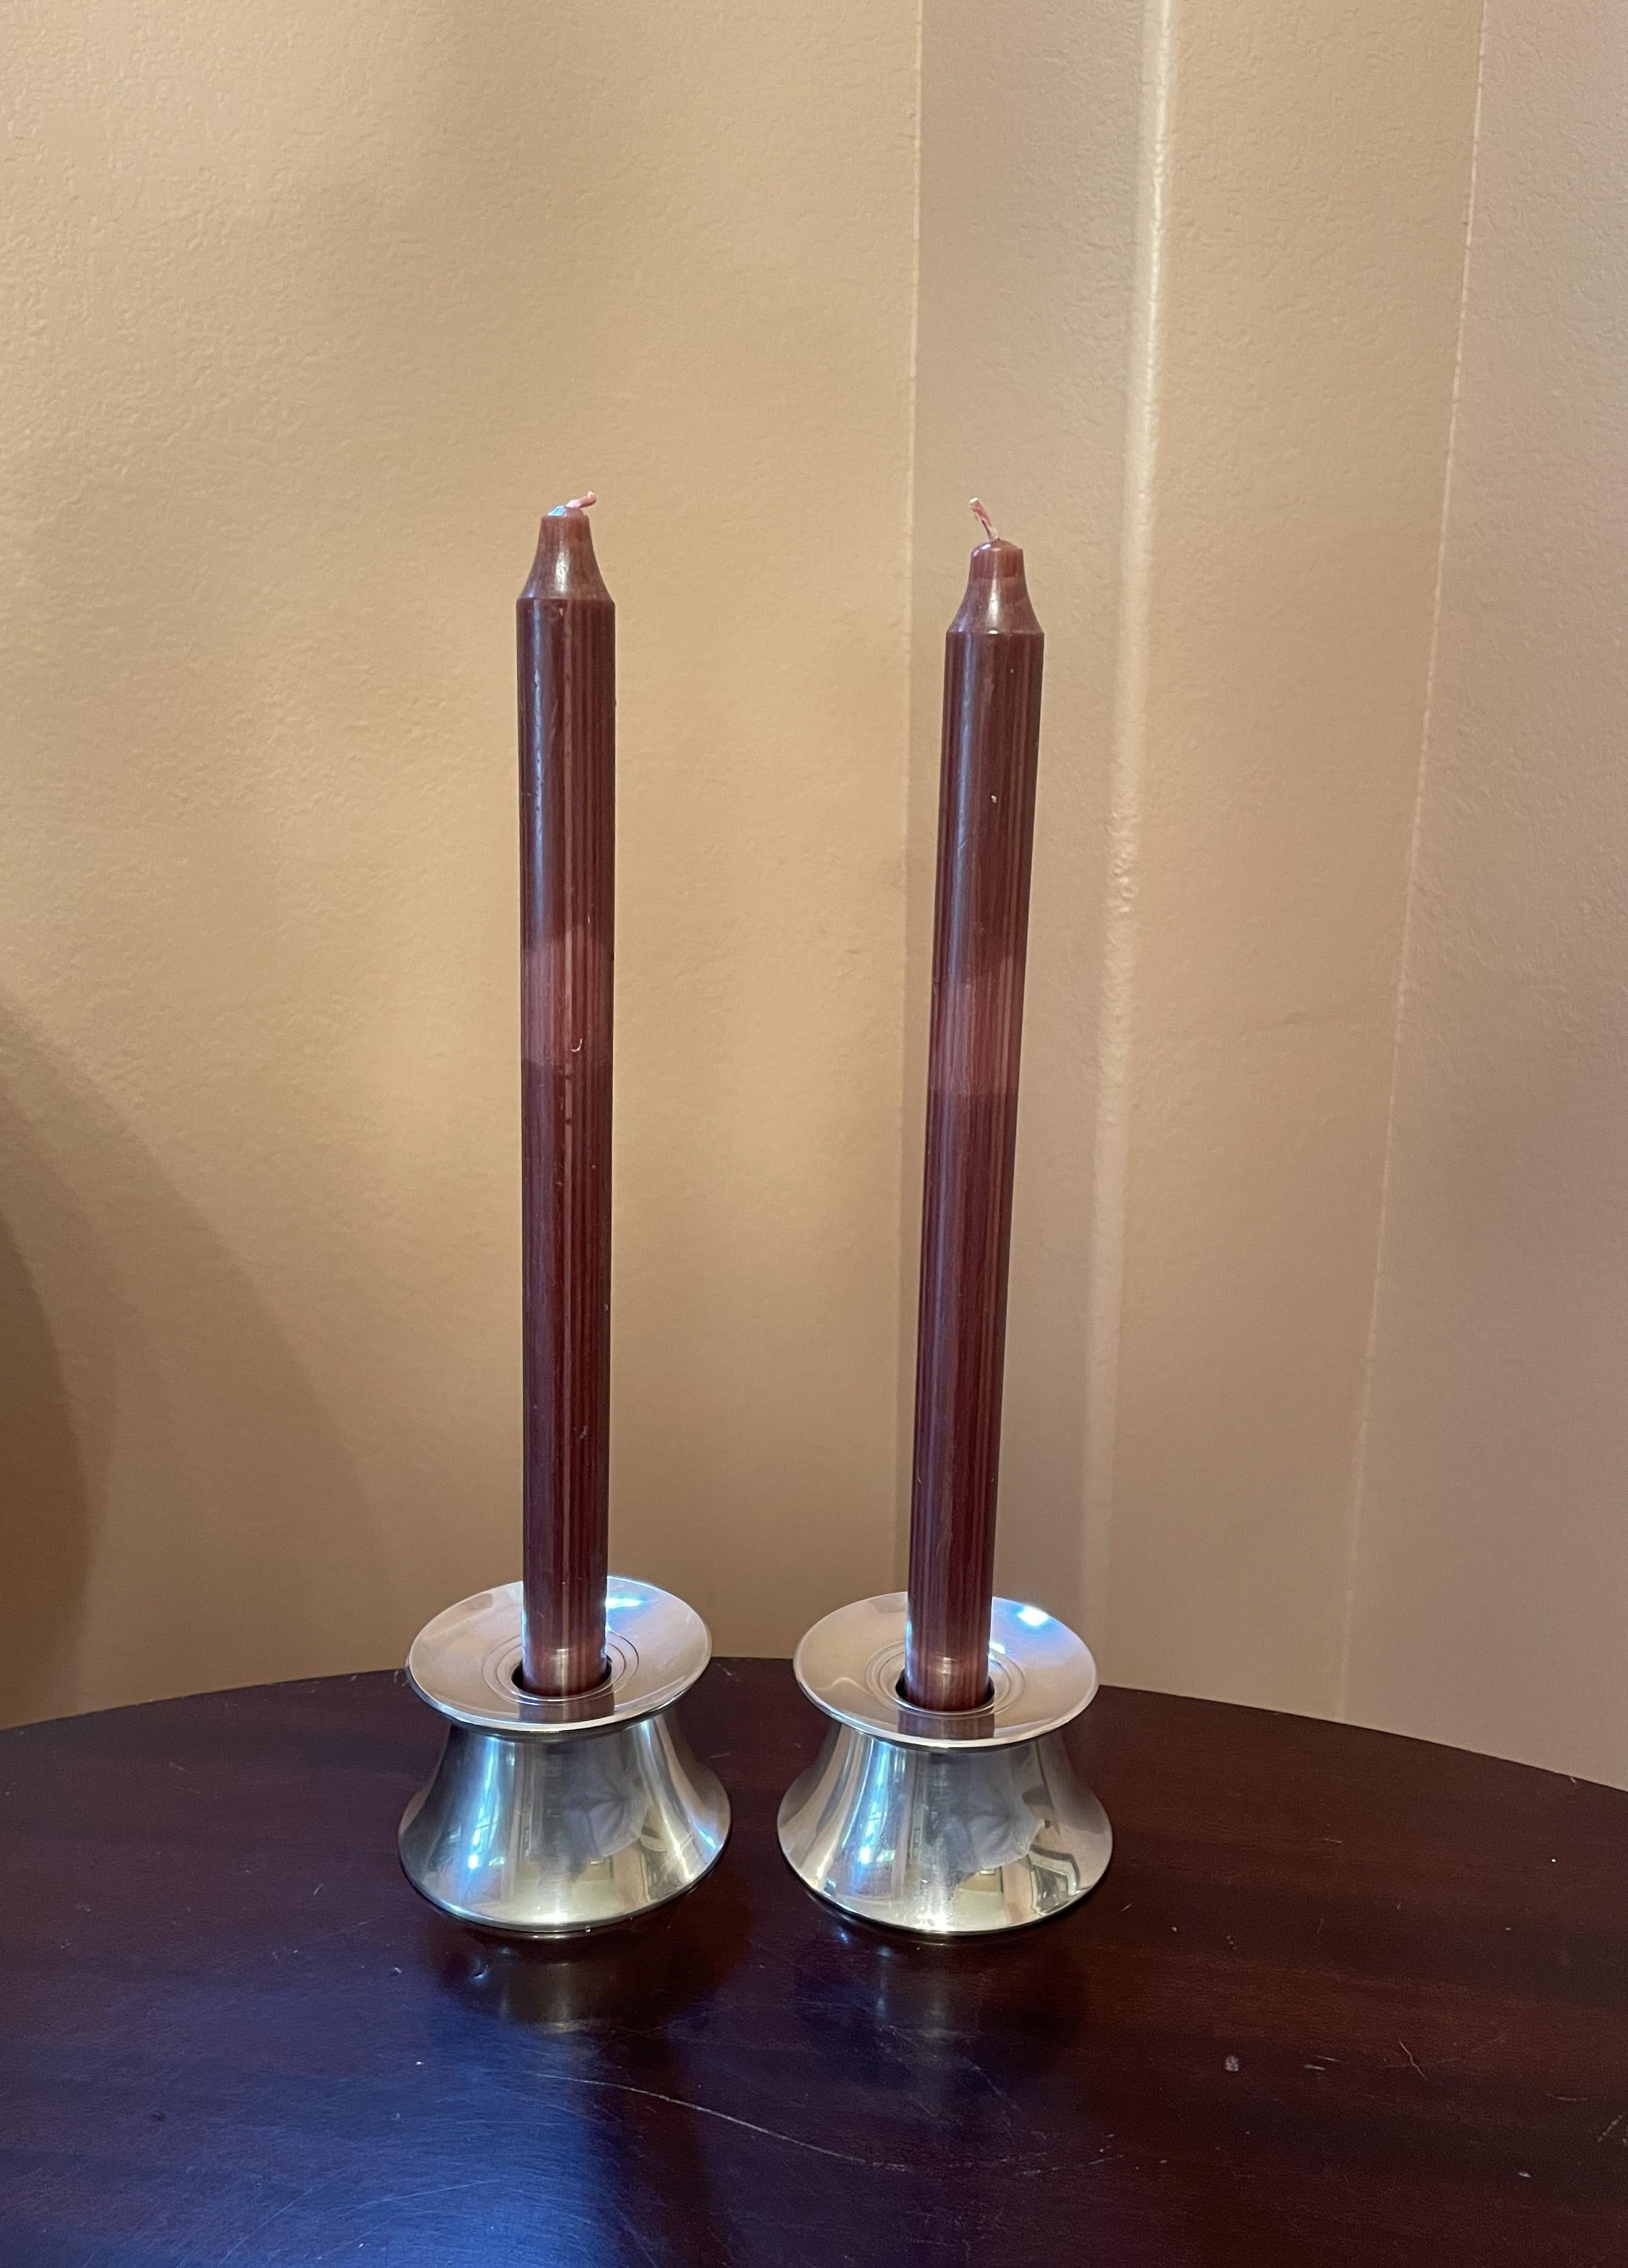 It is difficult to capture in pictures the simple, graceful beauty of this pair of sterling candleholders by Gorham. Classic and timeless MCM! The condition and quality of the silver is excellent, with a soft low-luster patina, and subtle detailing